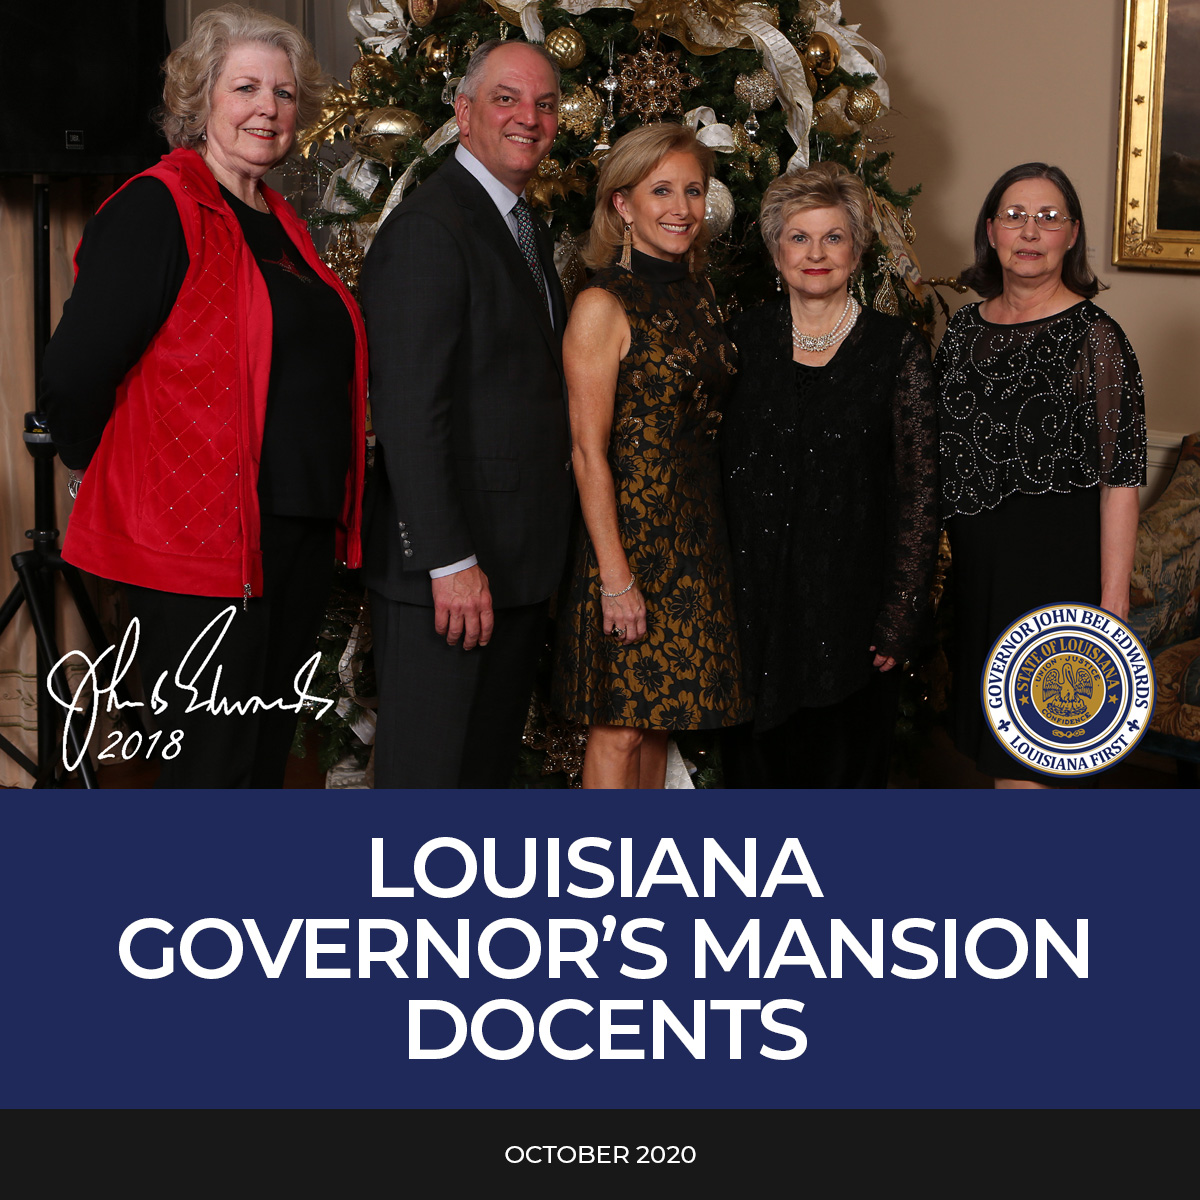 Louisiana Governor’s Mansion Docents